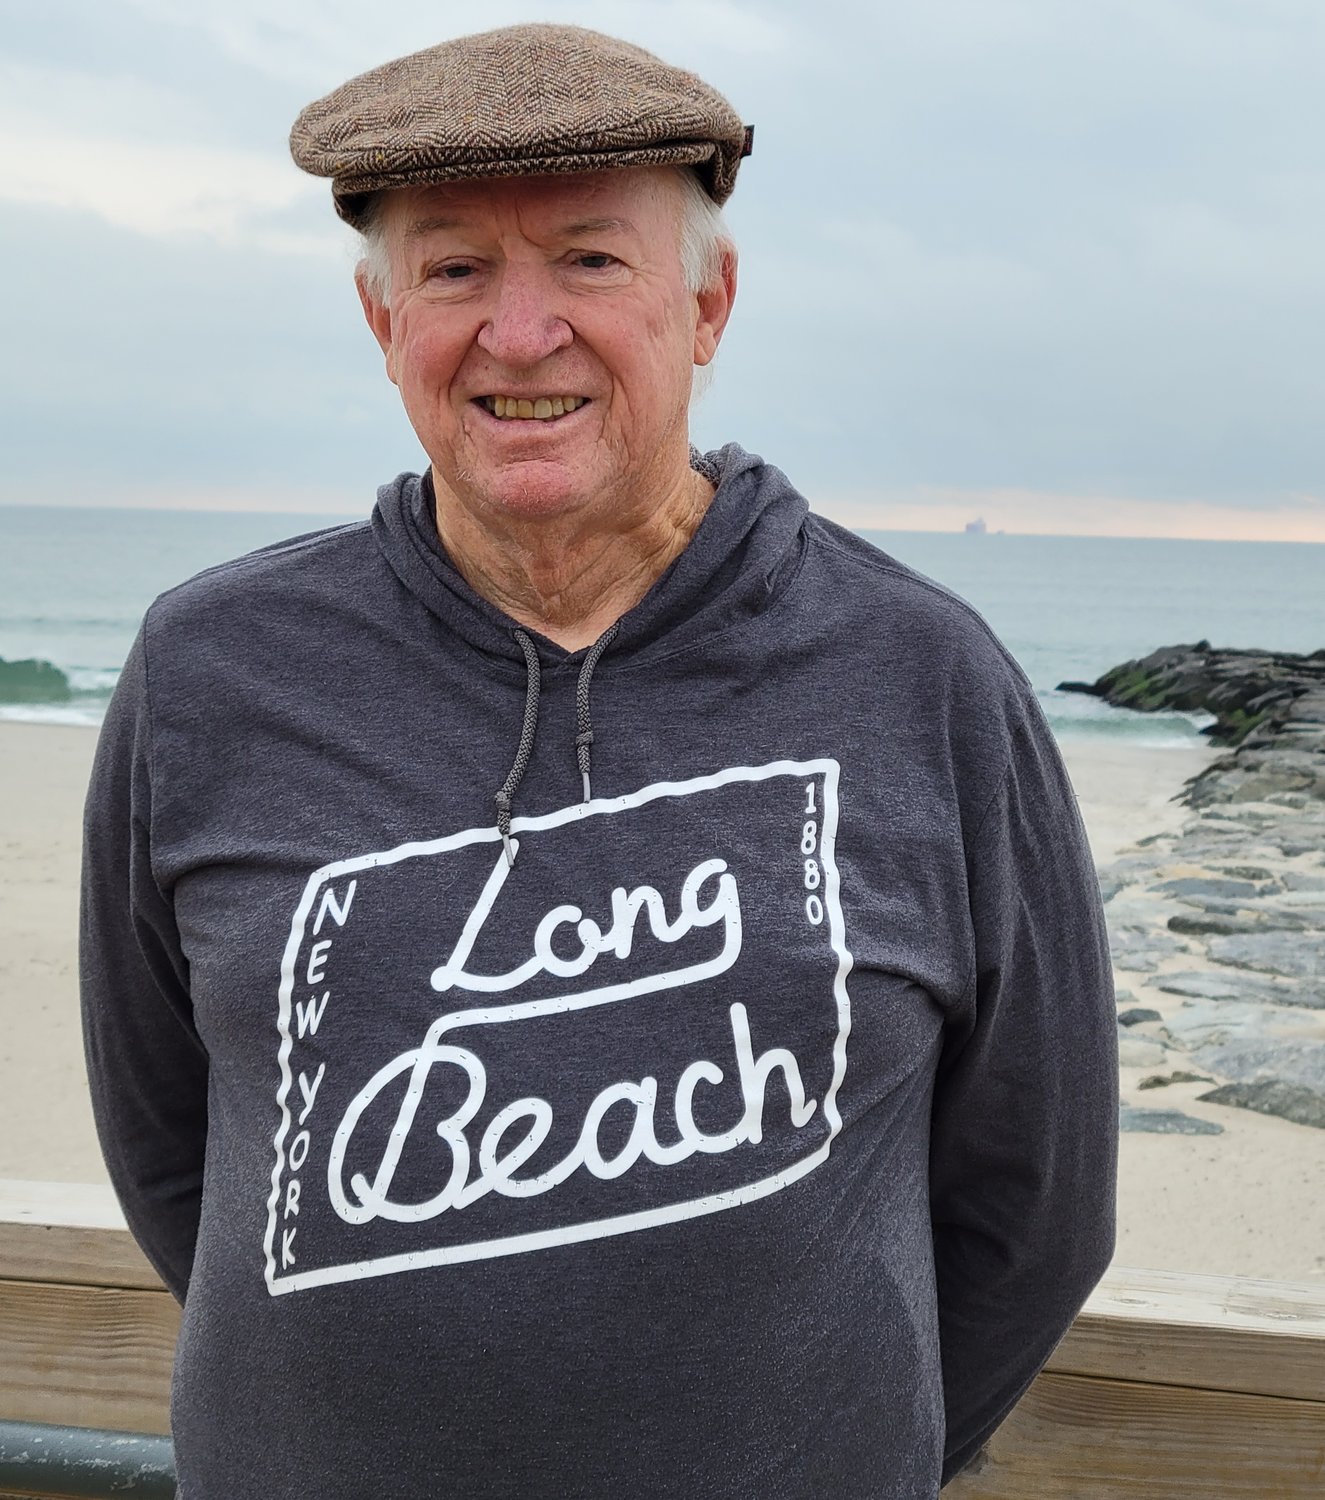 Dennis Carey, 74, wrote his first book, ‘Silver Strand,’ to celebrate Long Beach through the lens of historical fiction.